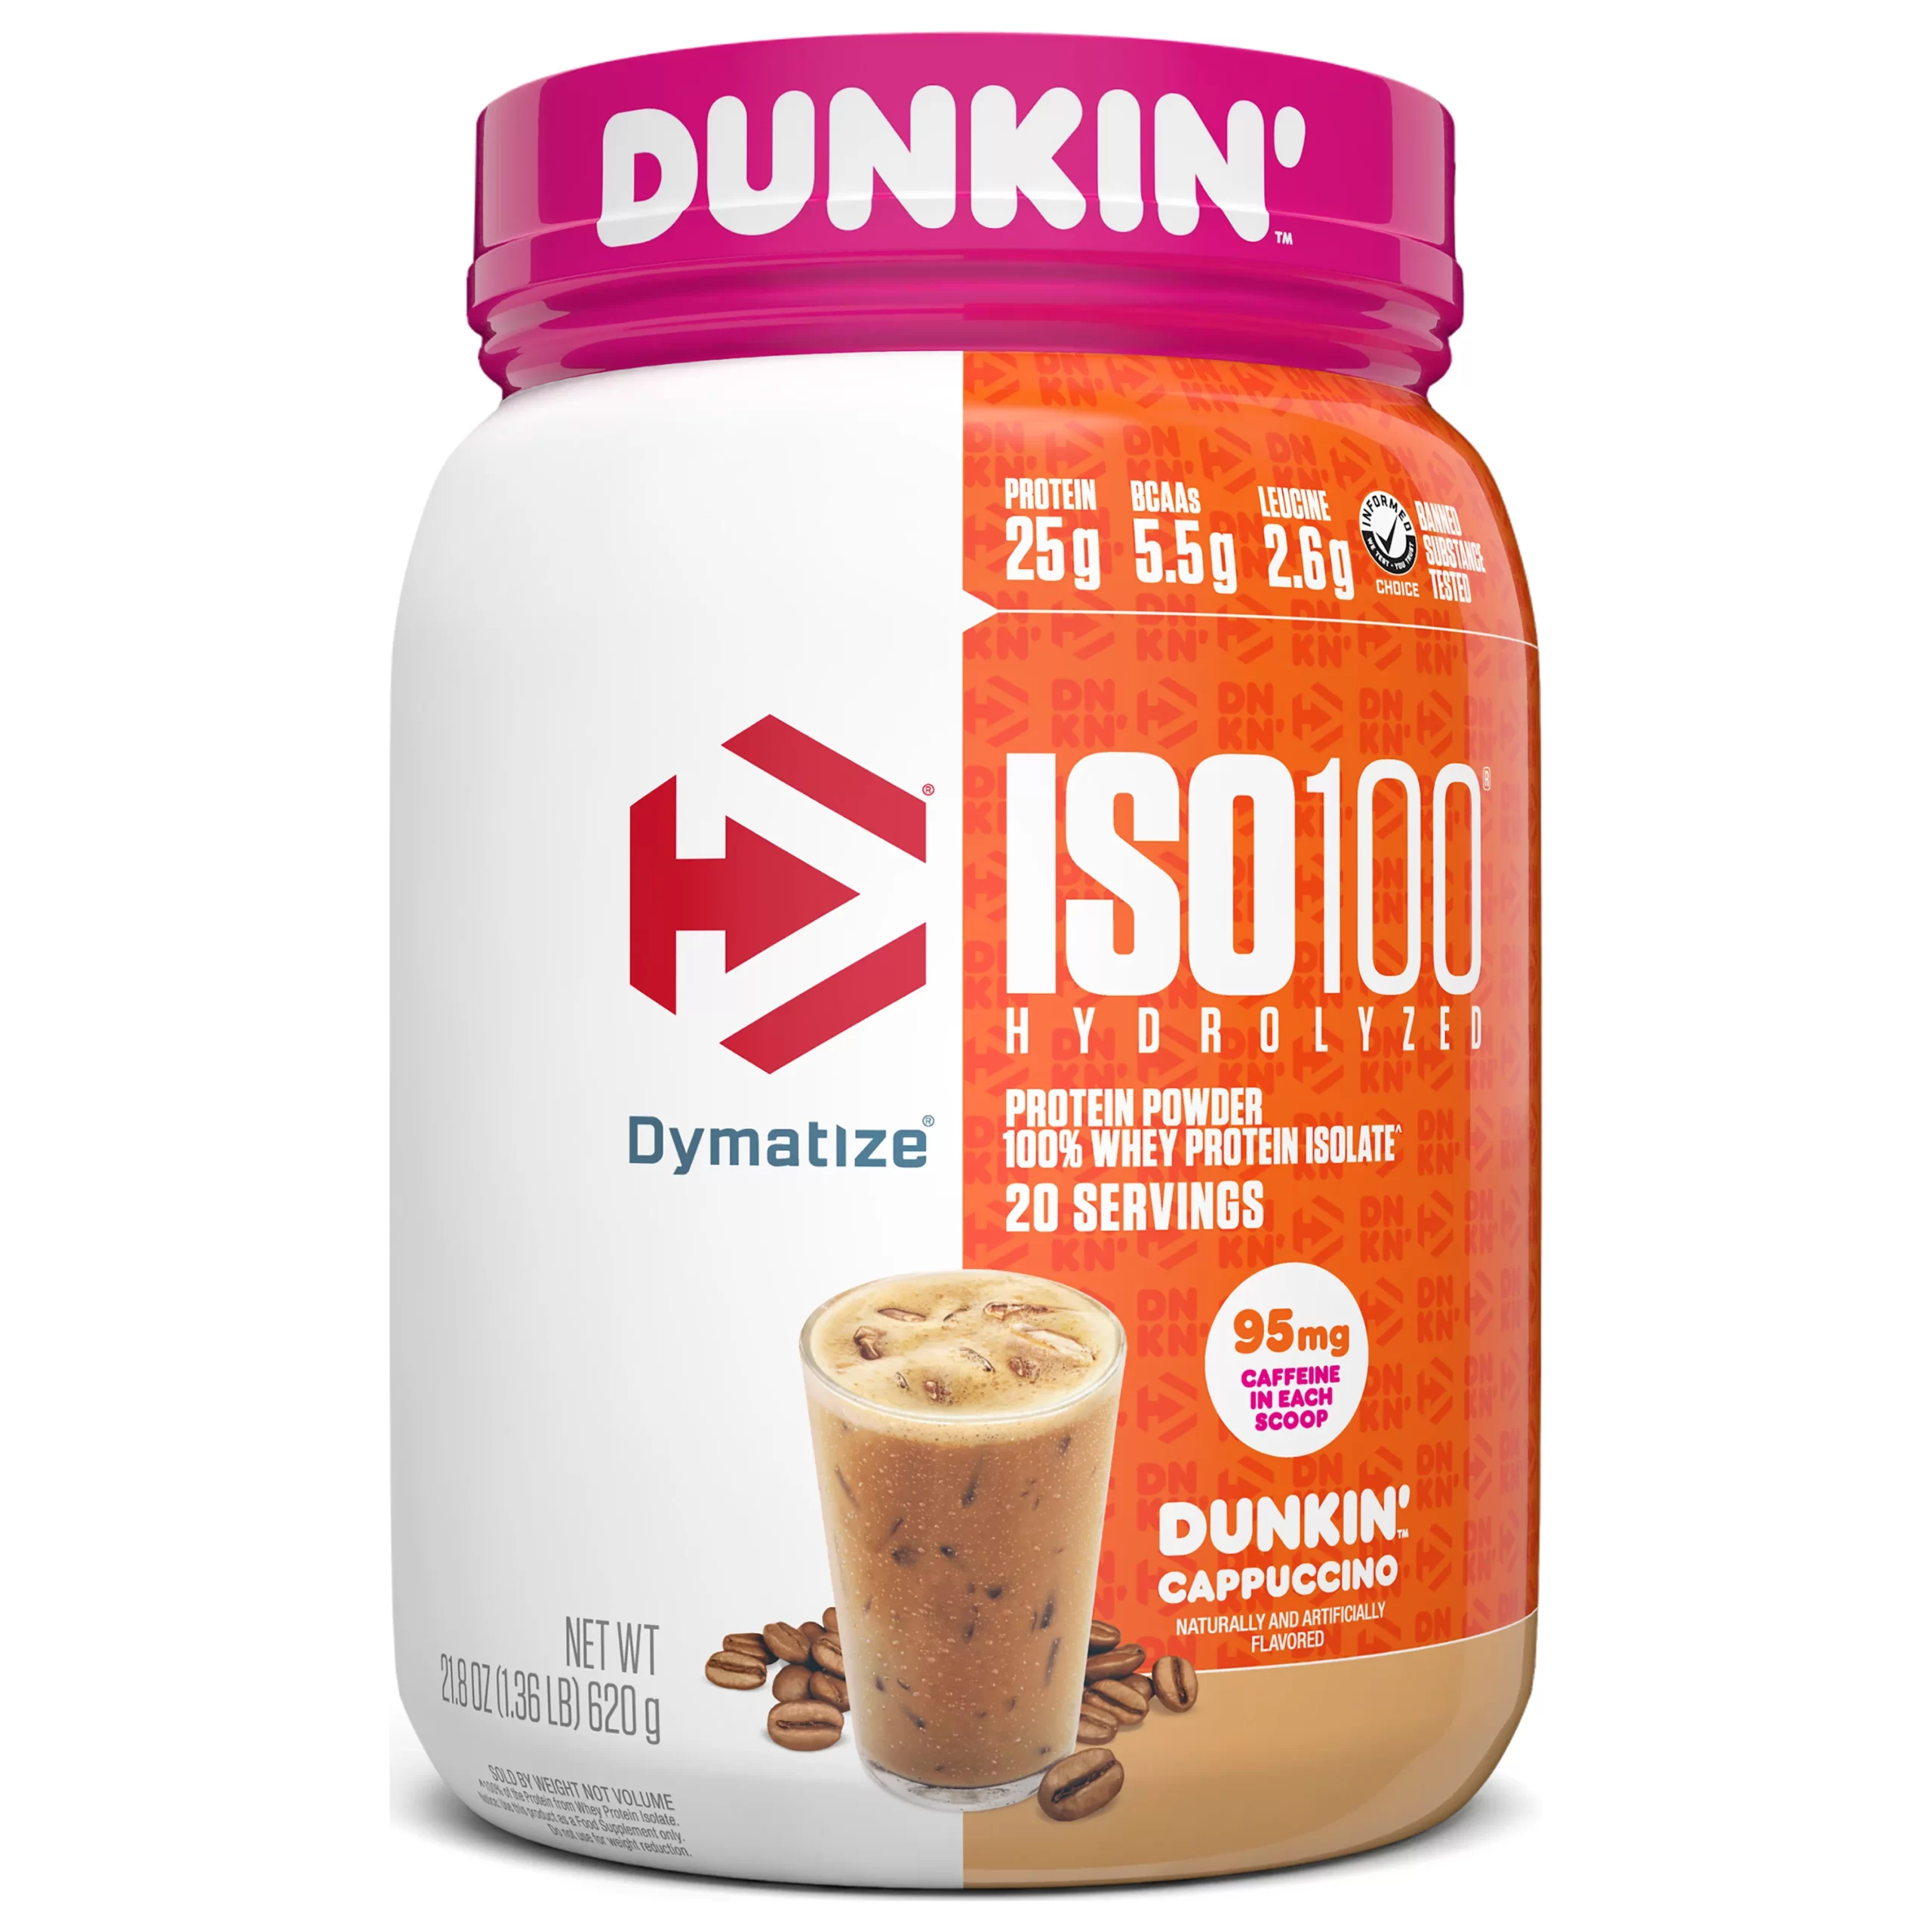 Dymatize ISO100 Hydrolyzed Whey Isolate Protein Powder, Dunkin’ Cappuccino, 25g Protein, 20 Serv